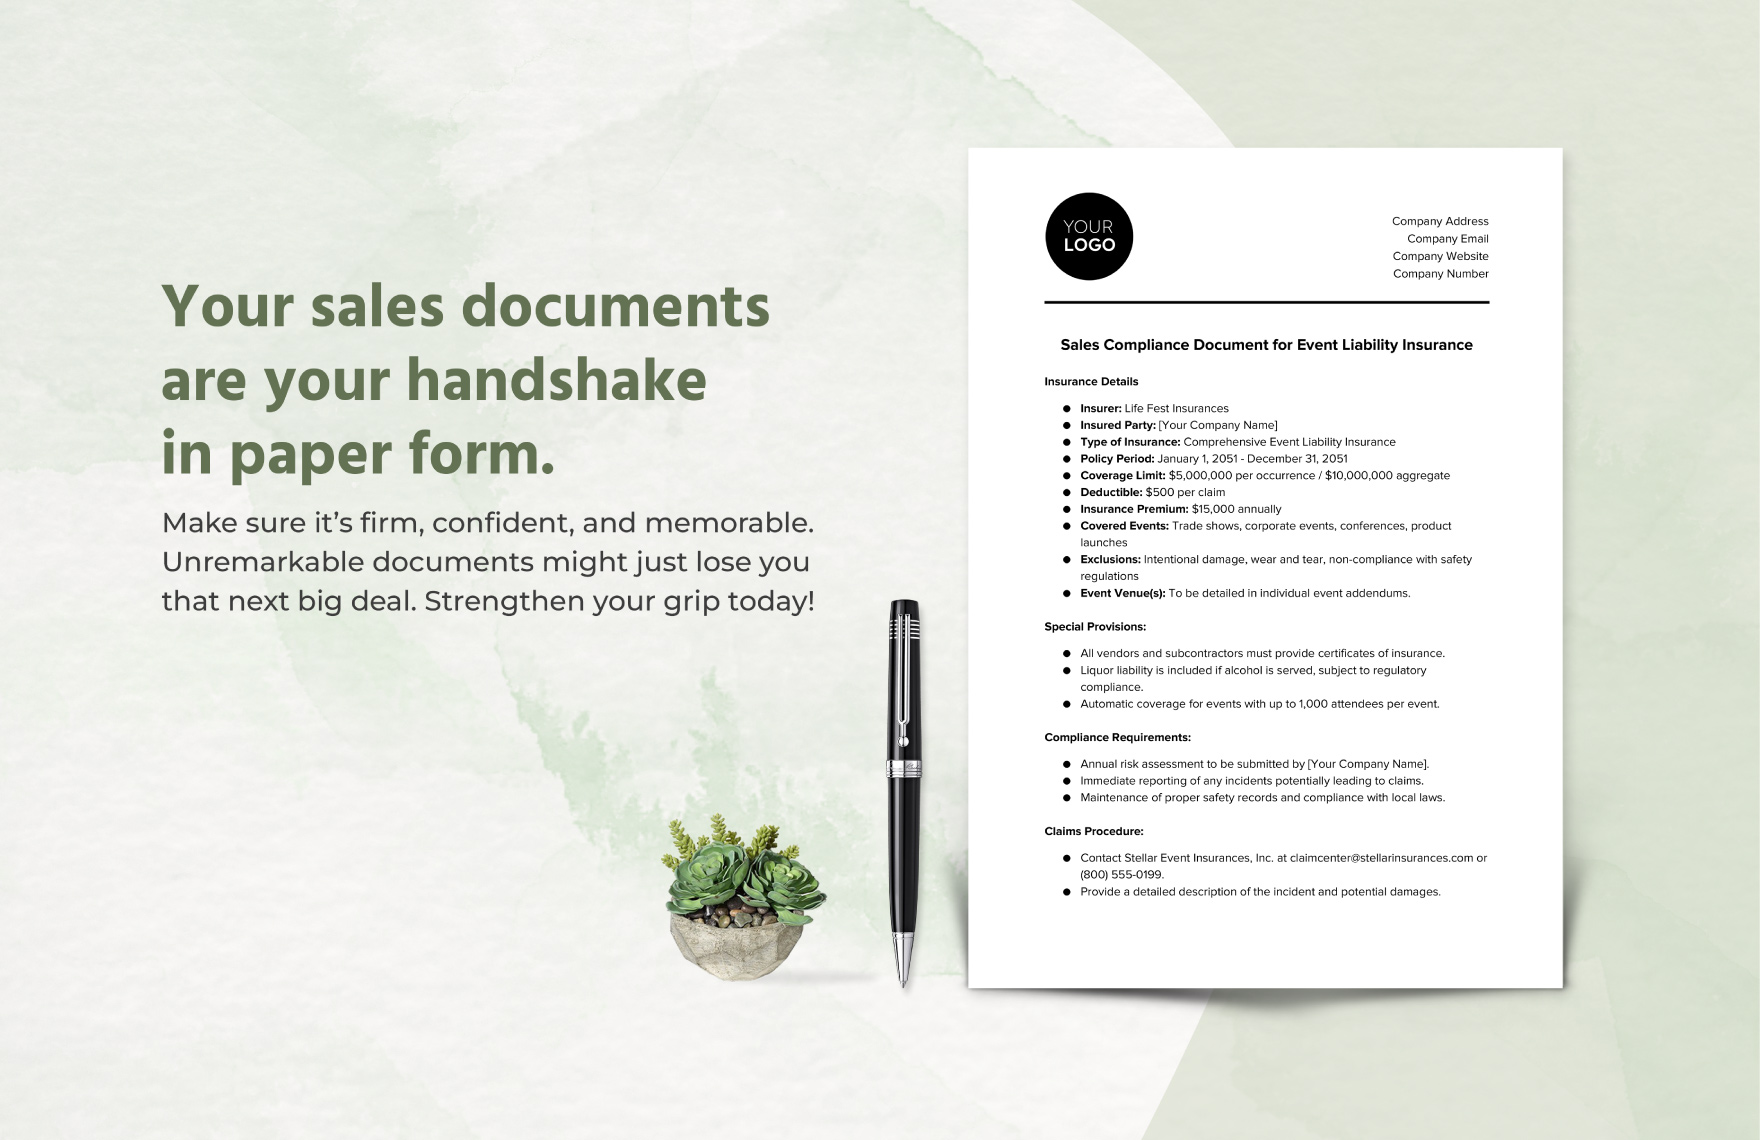 Sales Compliance Document for Event Liability Insurance Template